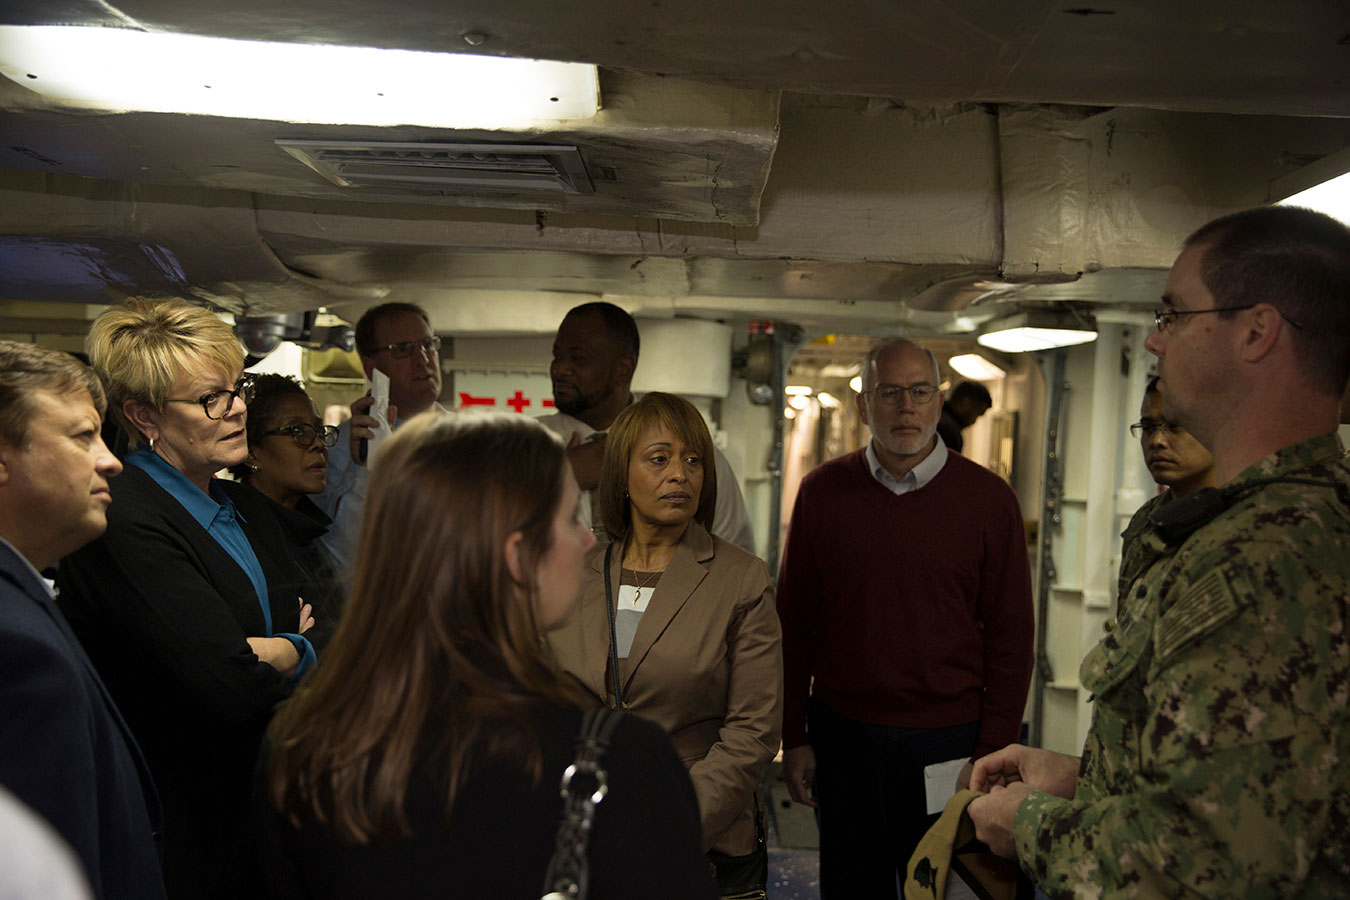 Fiscal Service staff and Navy personnel inside ship